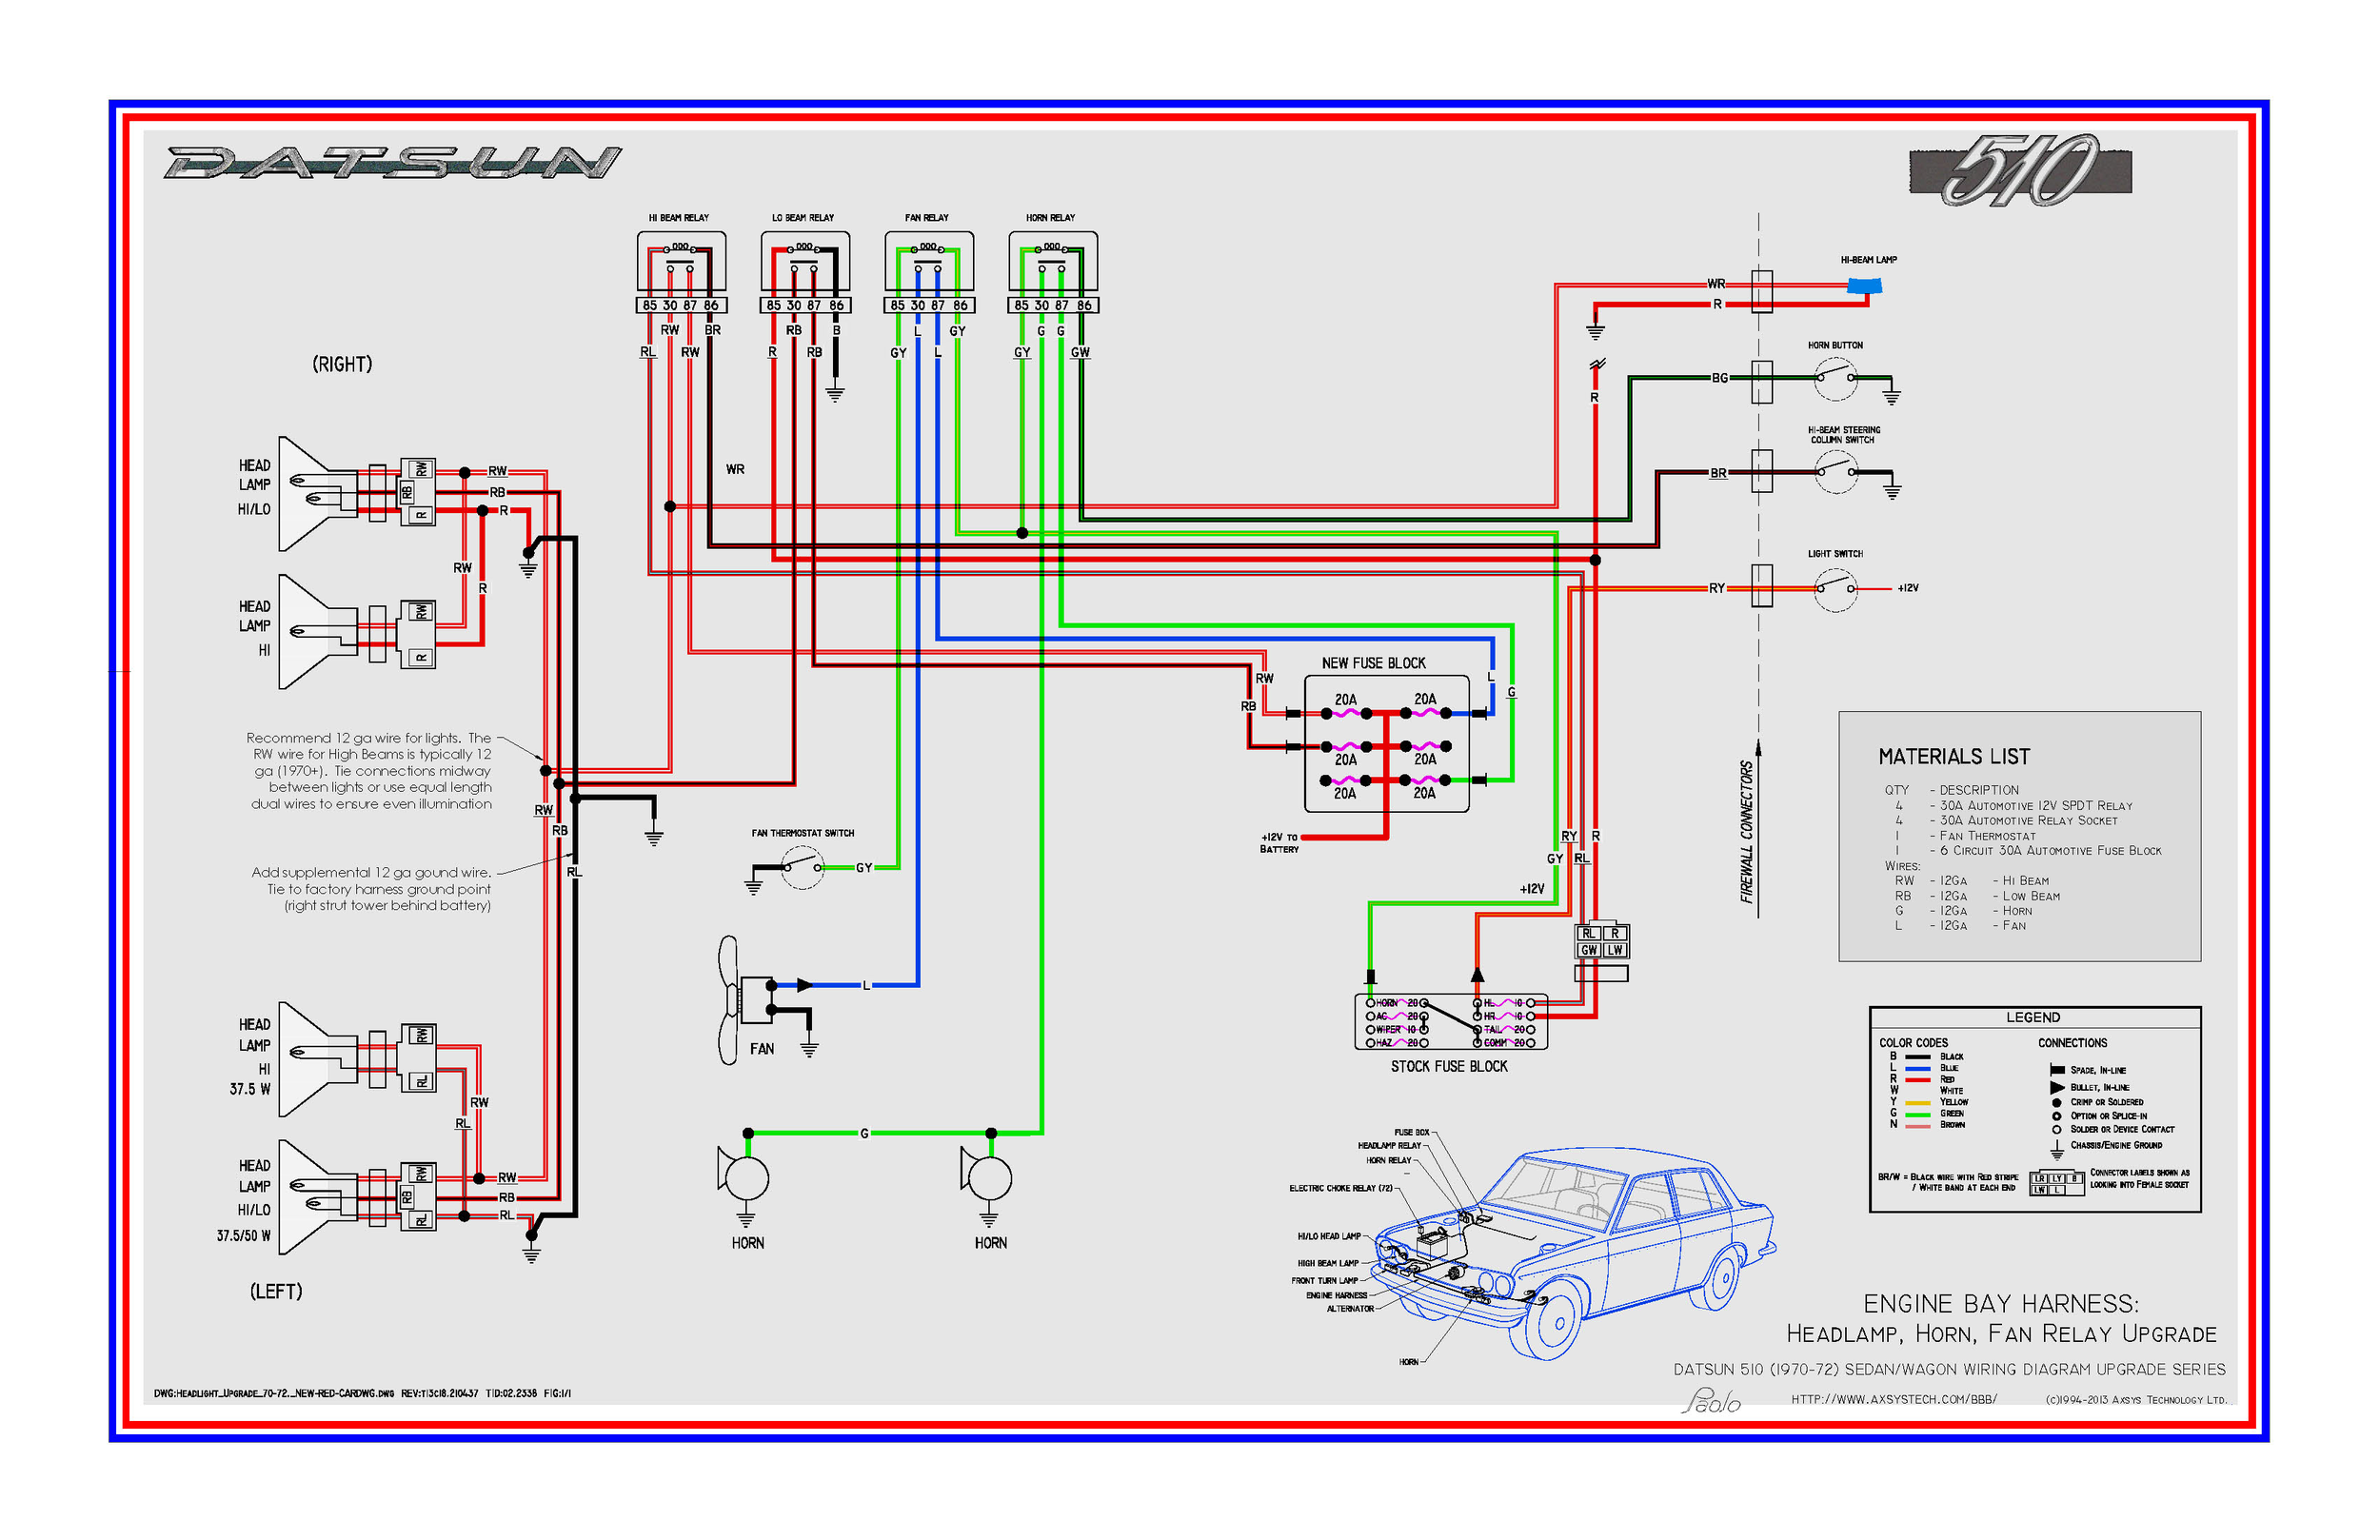 Headlight Wiring Diagram With Relay from datsun510.com